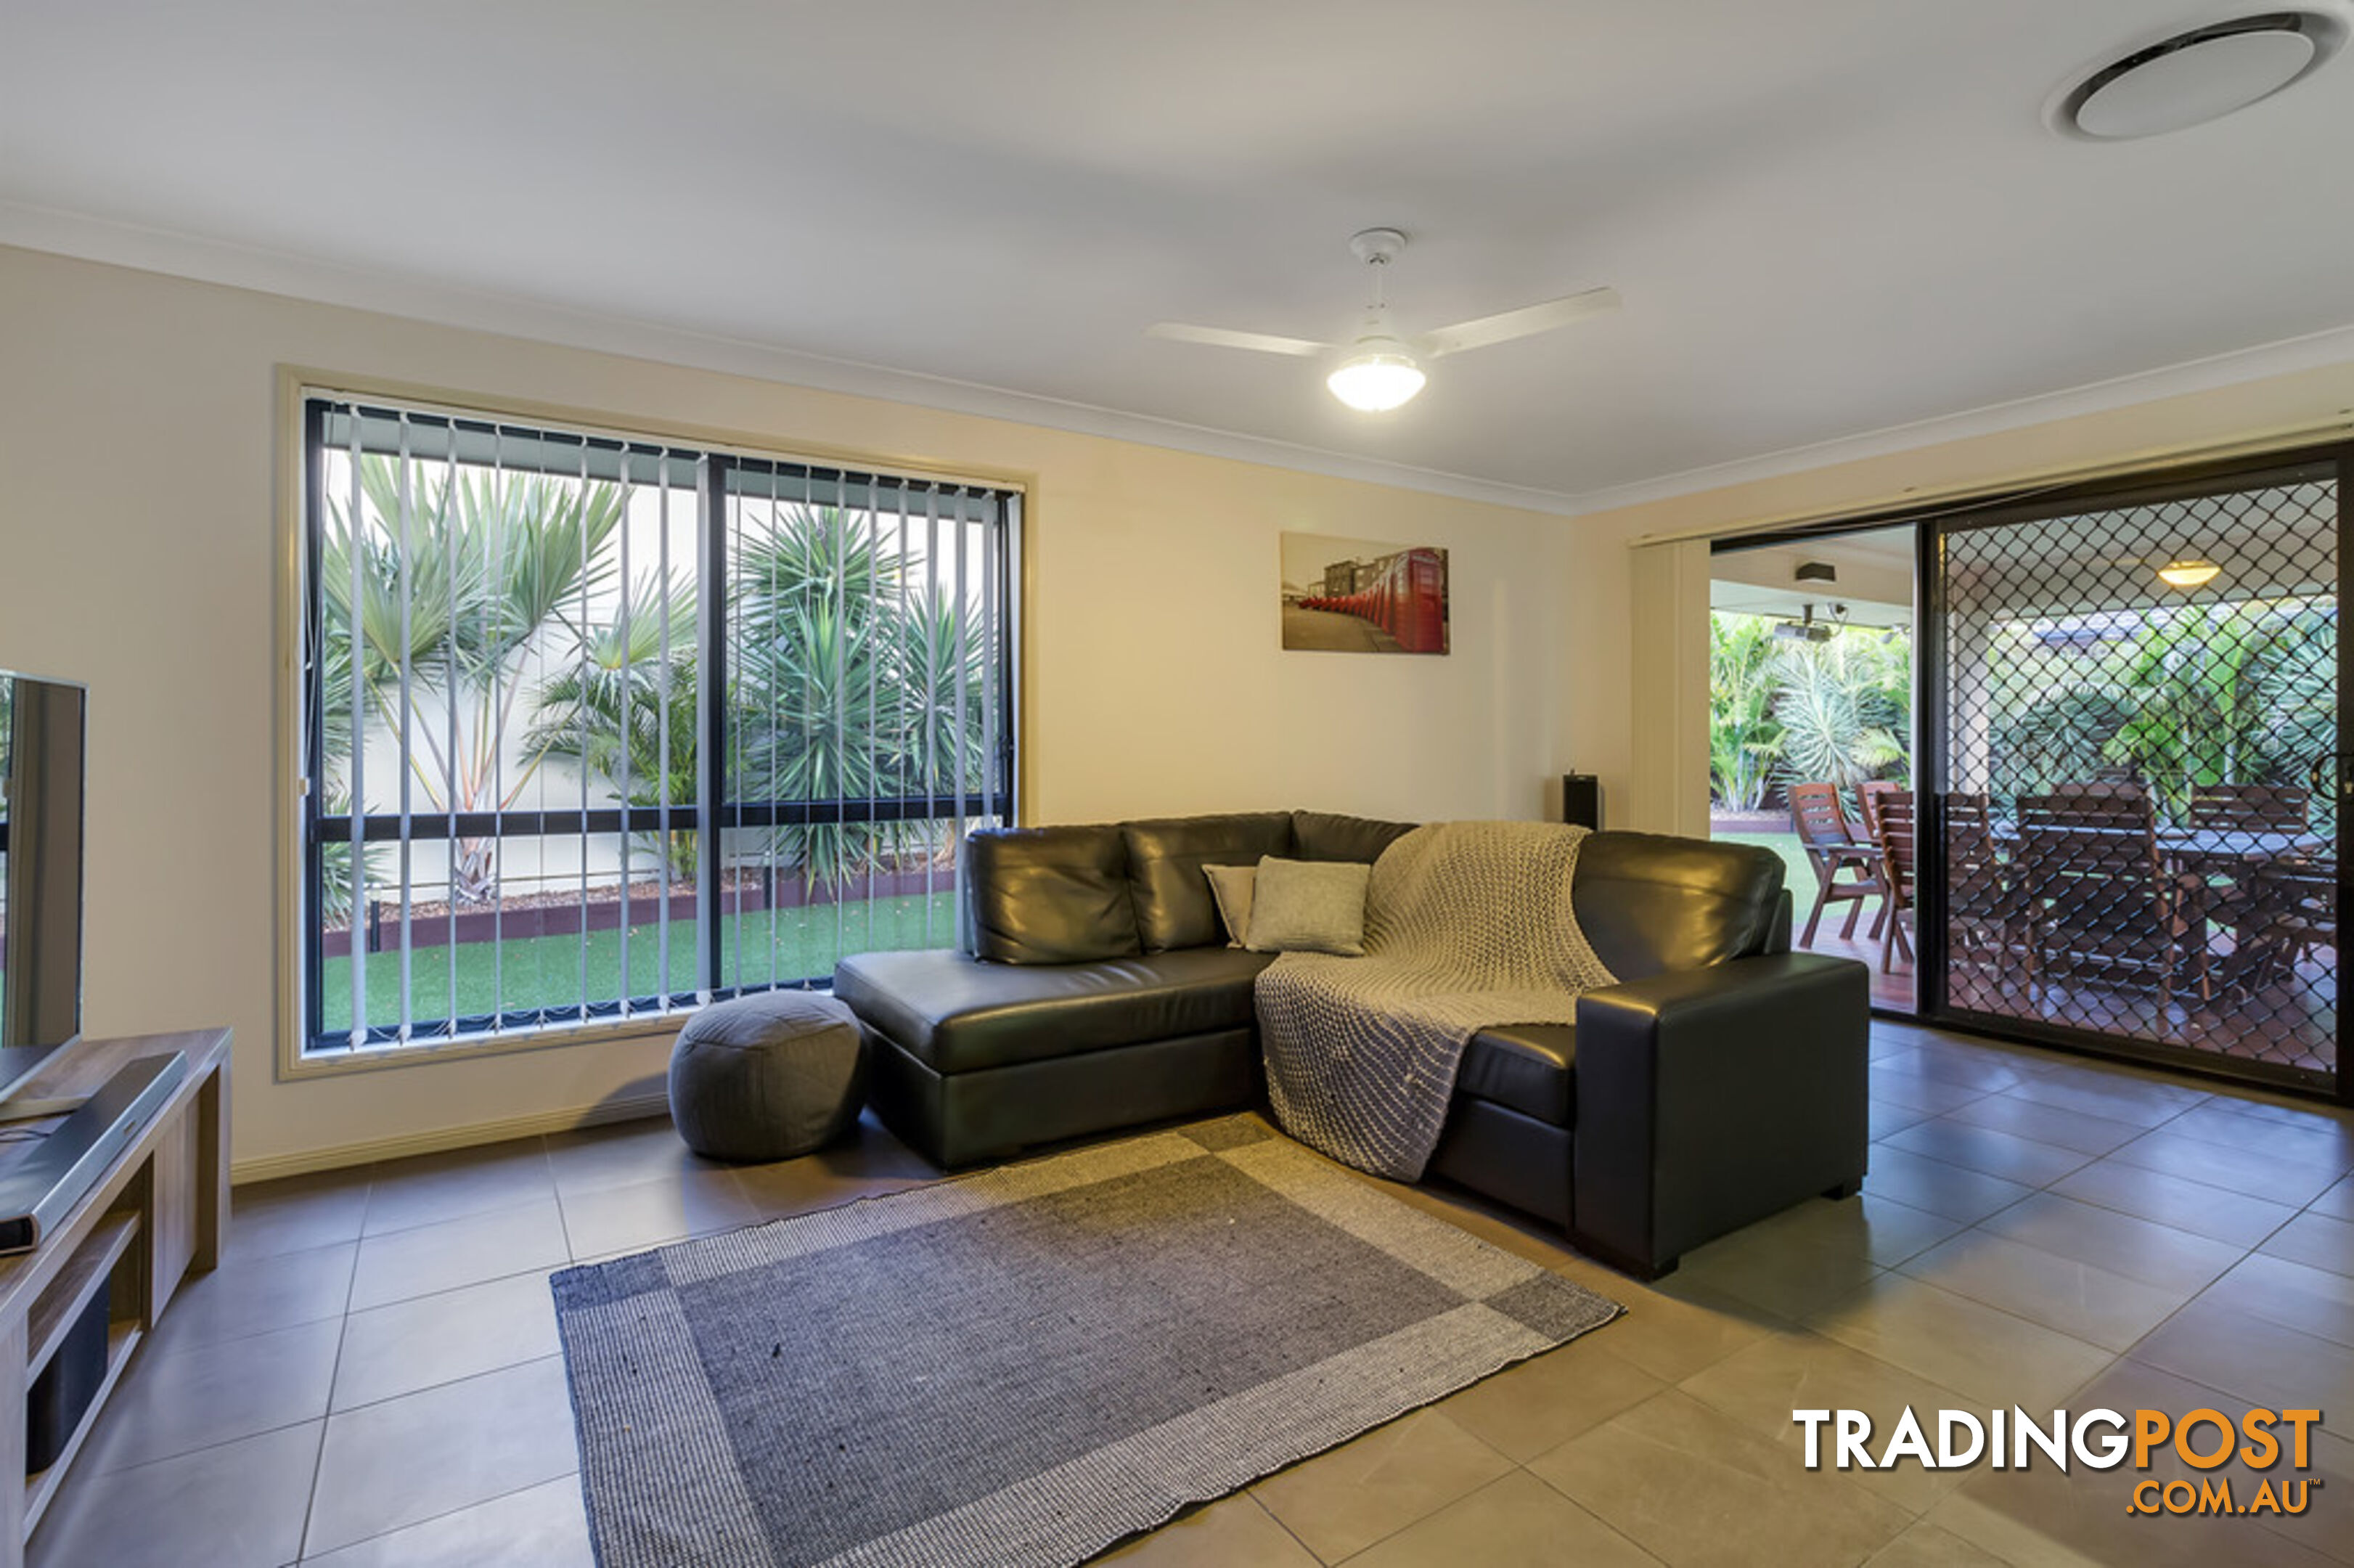 7 Oceanis Drive OXENFORD QLD 4210